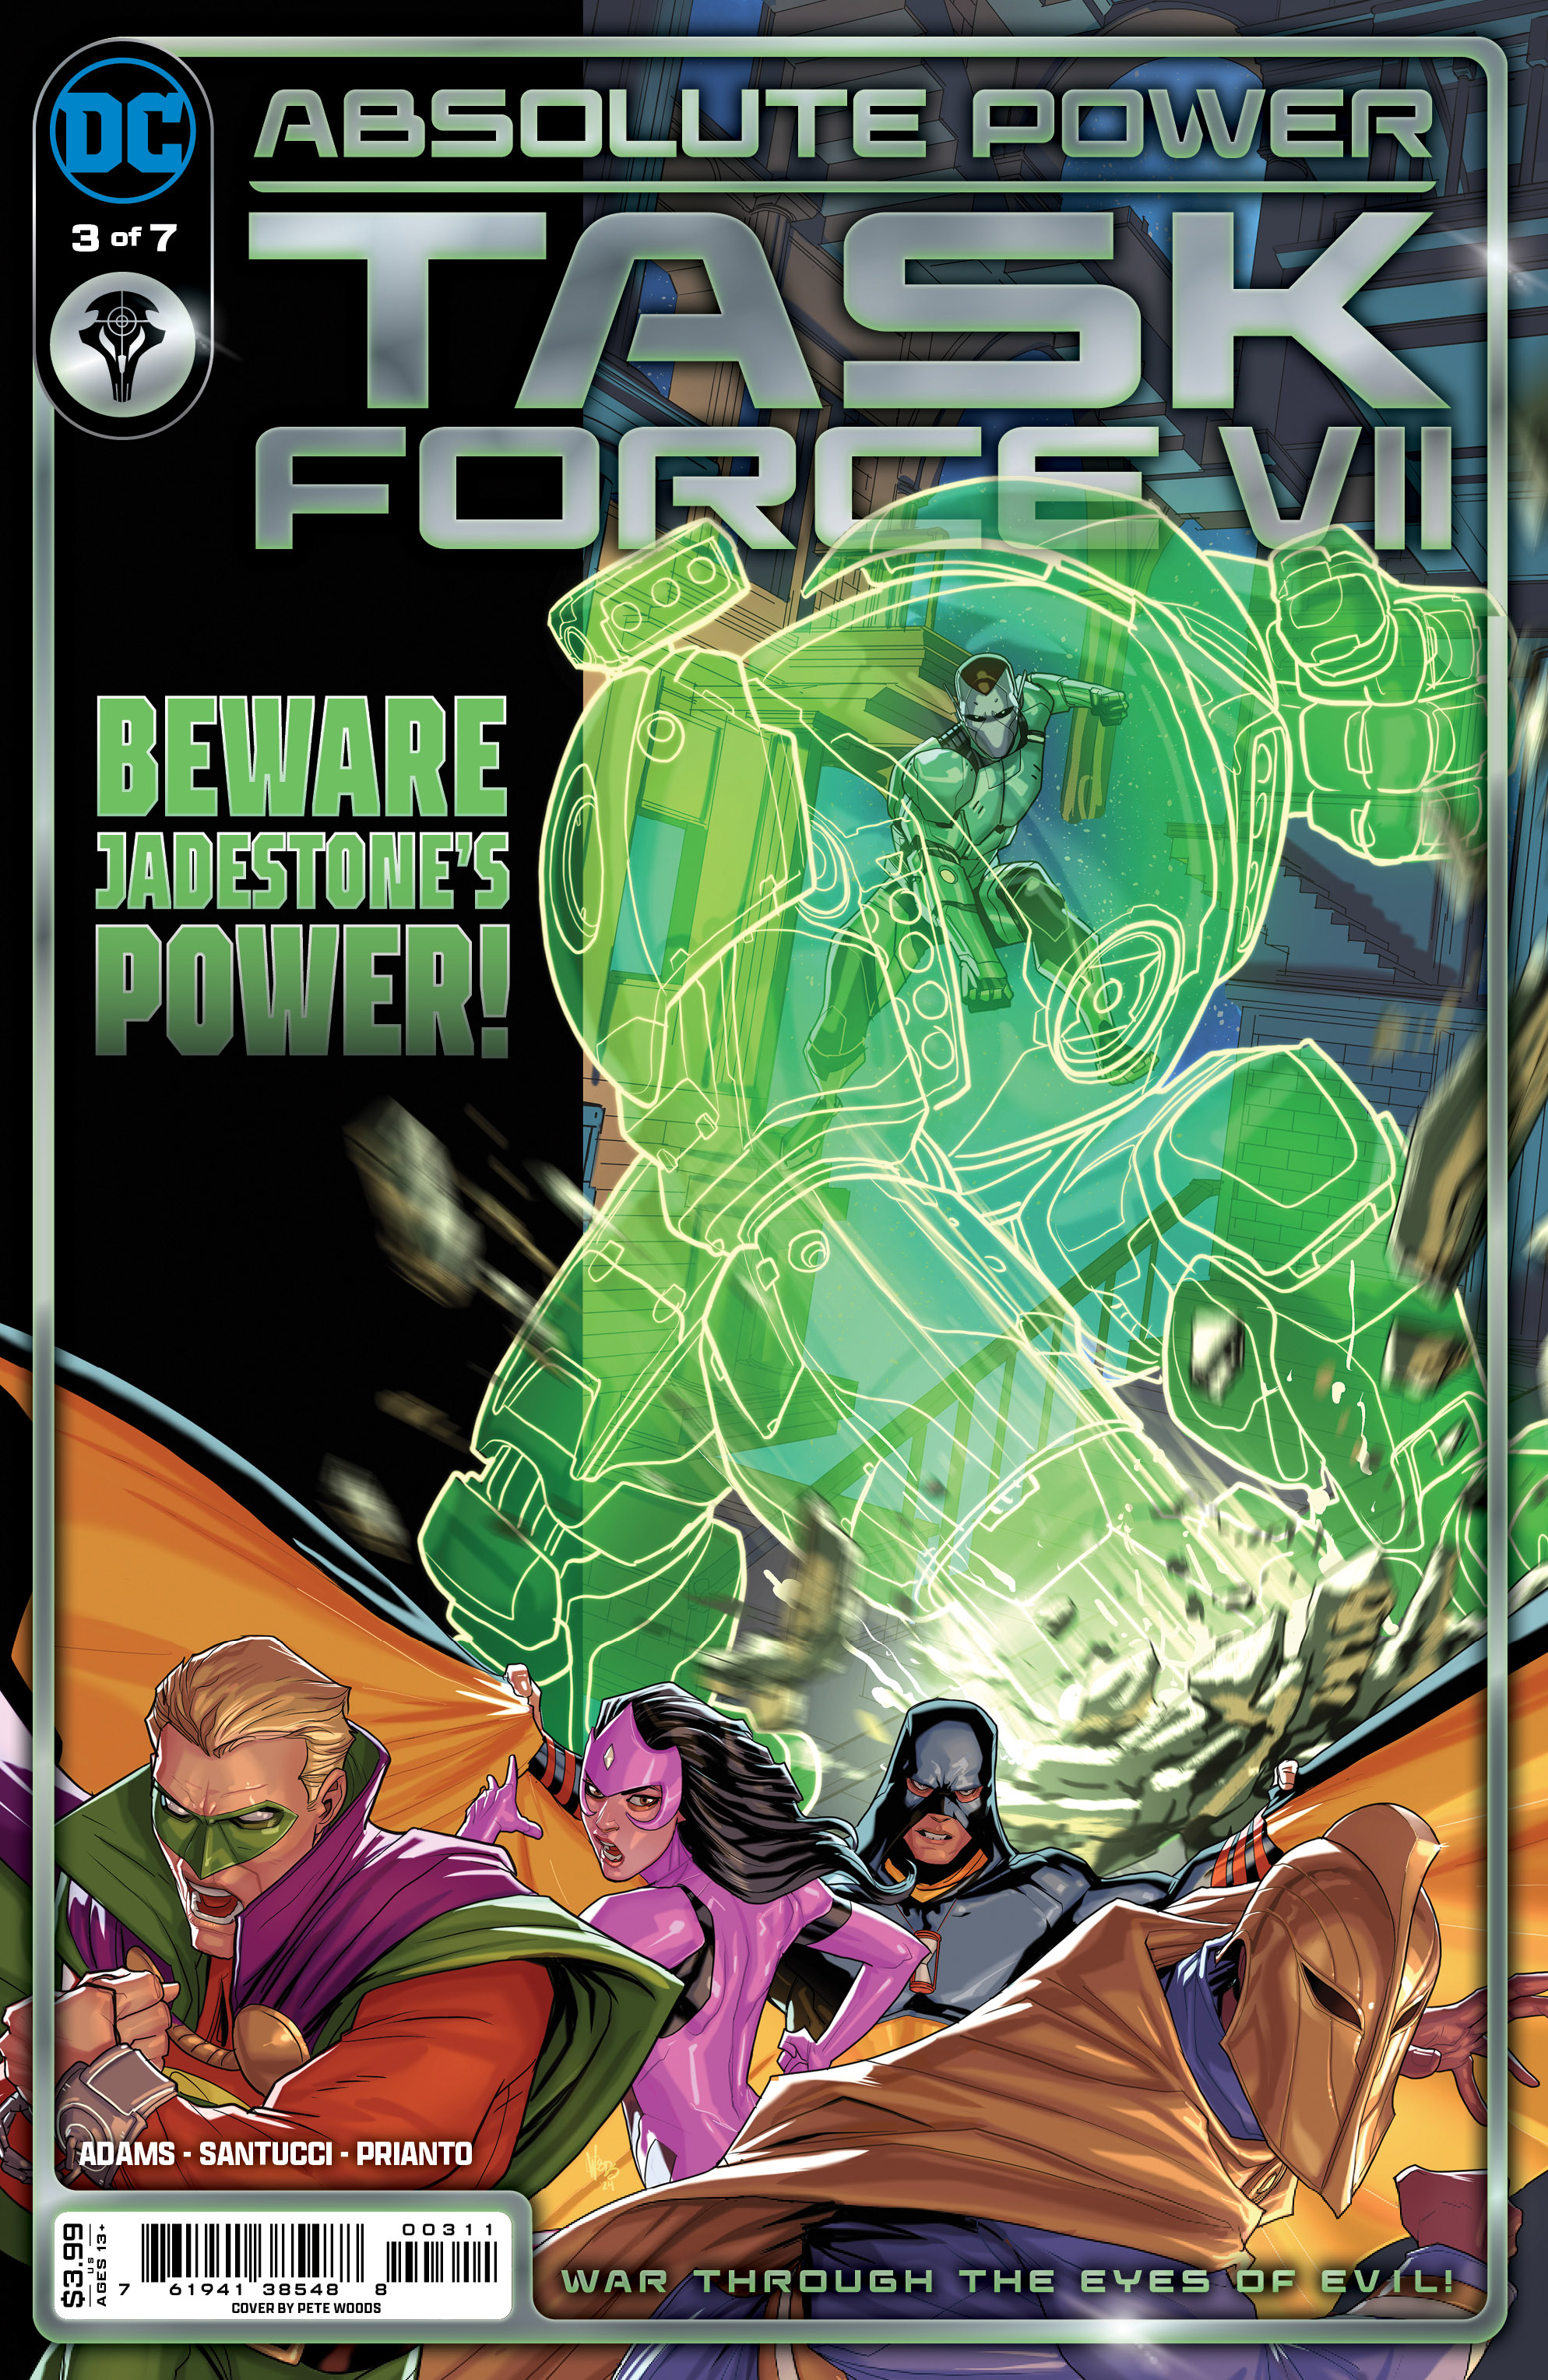 Absolute Power Task Force VII #3 Cover A Pete Woods (Of 7)